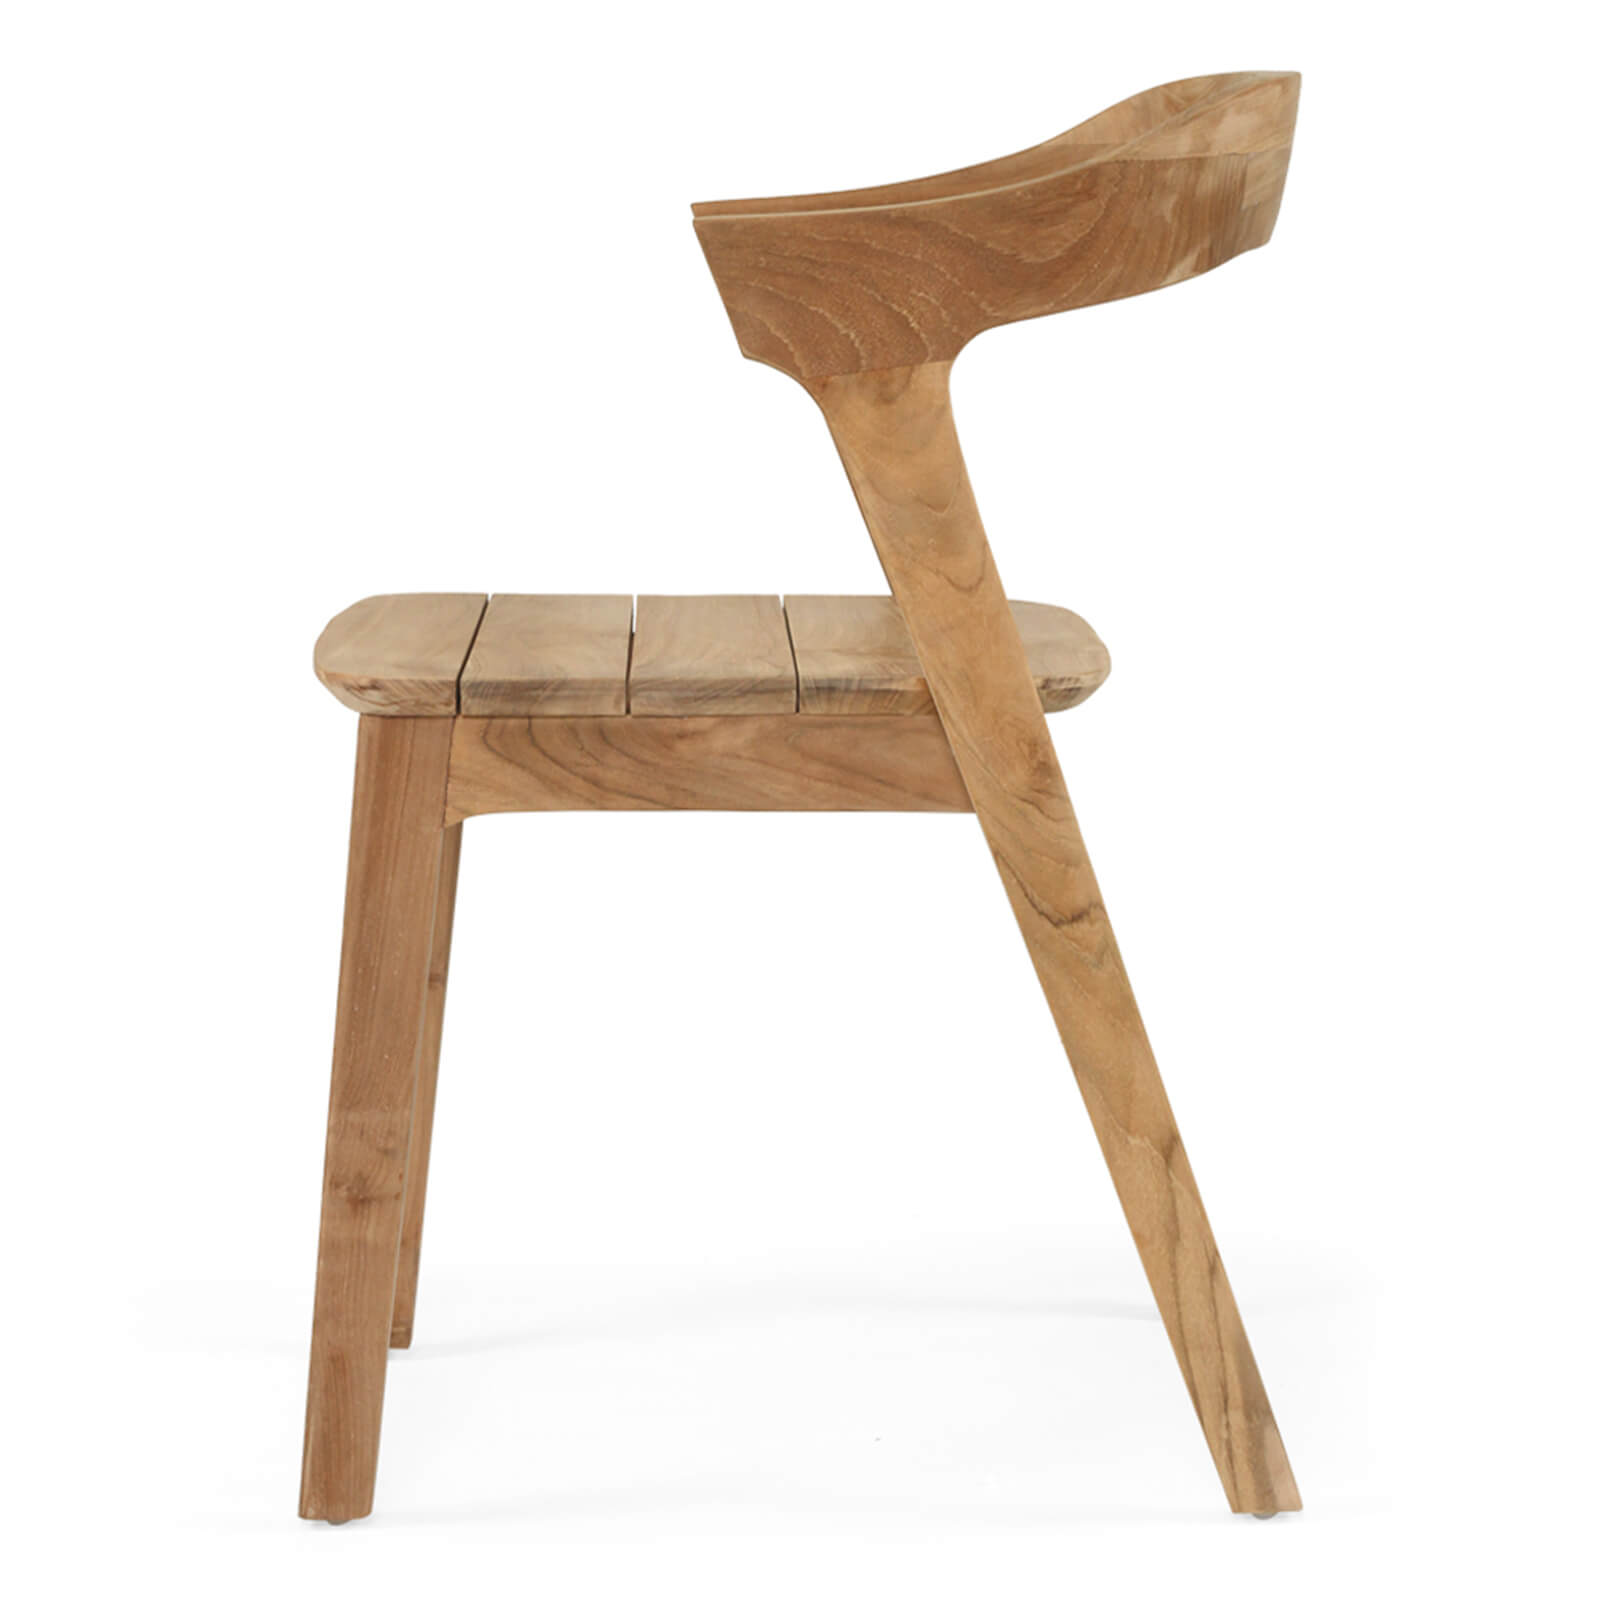 Lagoon | Coastal Natural Wooden Dining Chairs With Arms